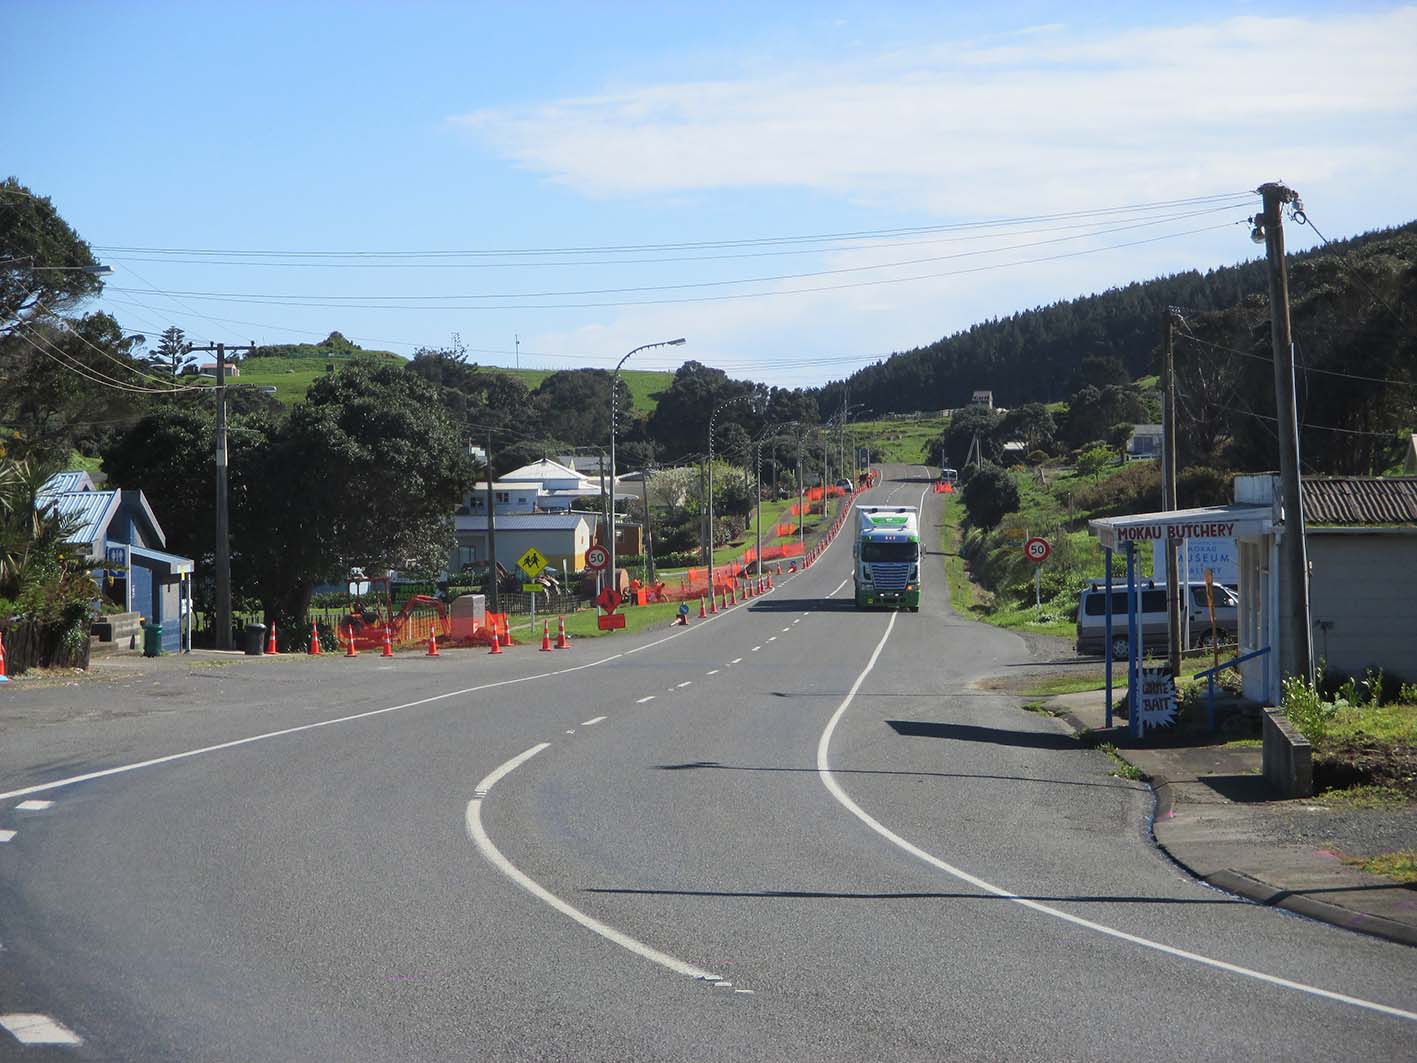 WDC have replaced approximately 550 metres of water main in Mokau township